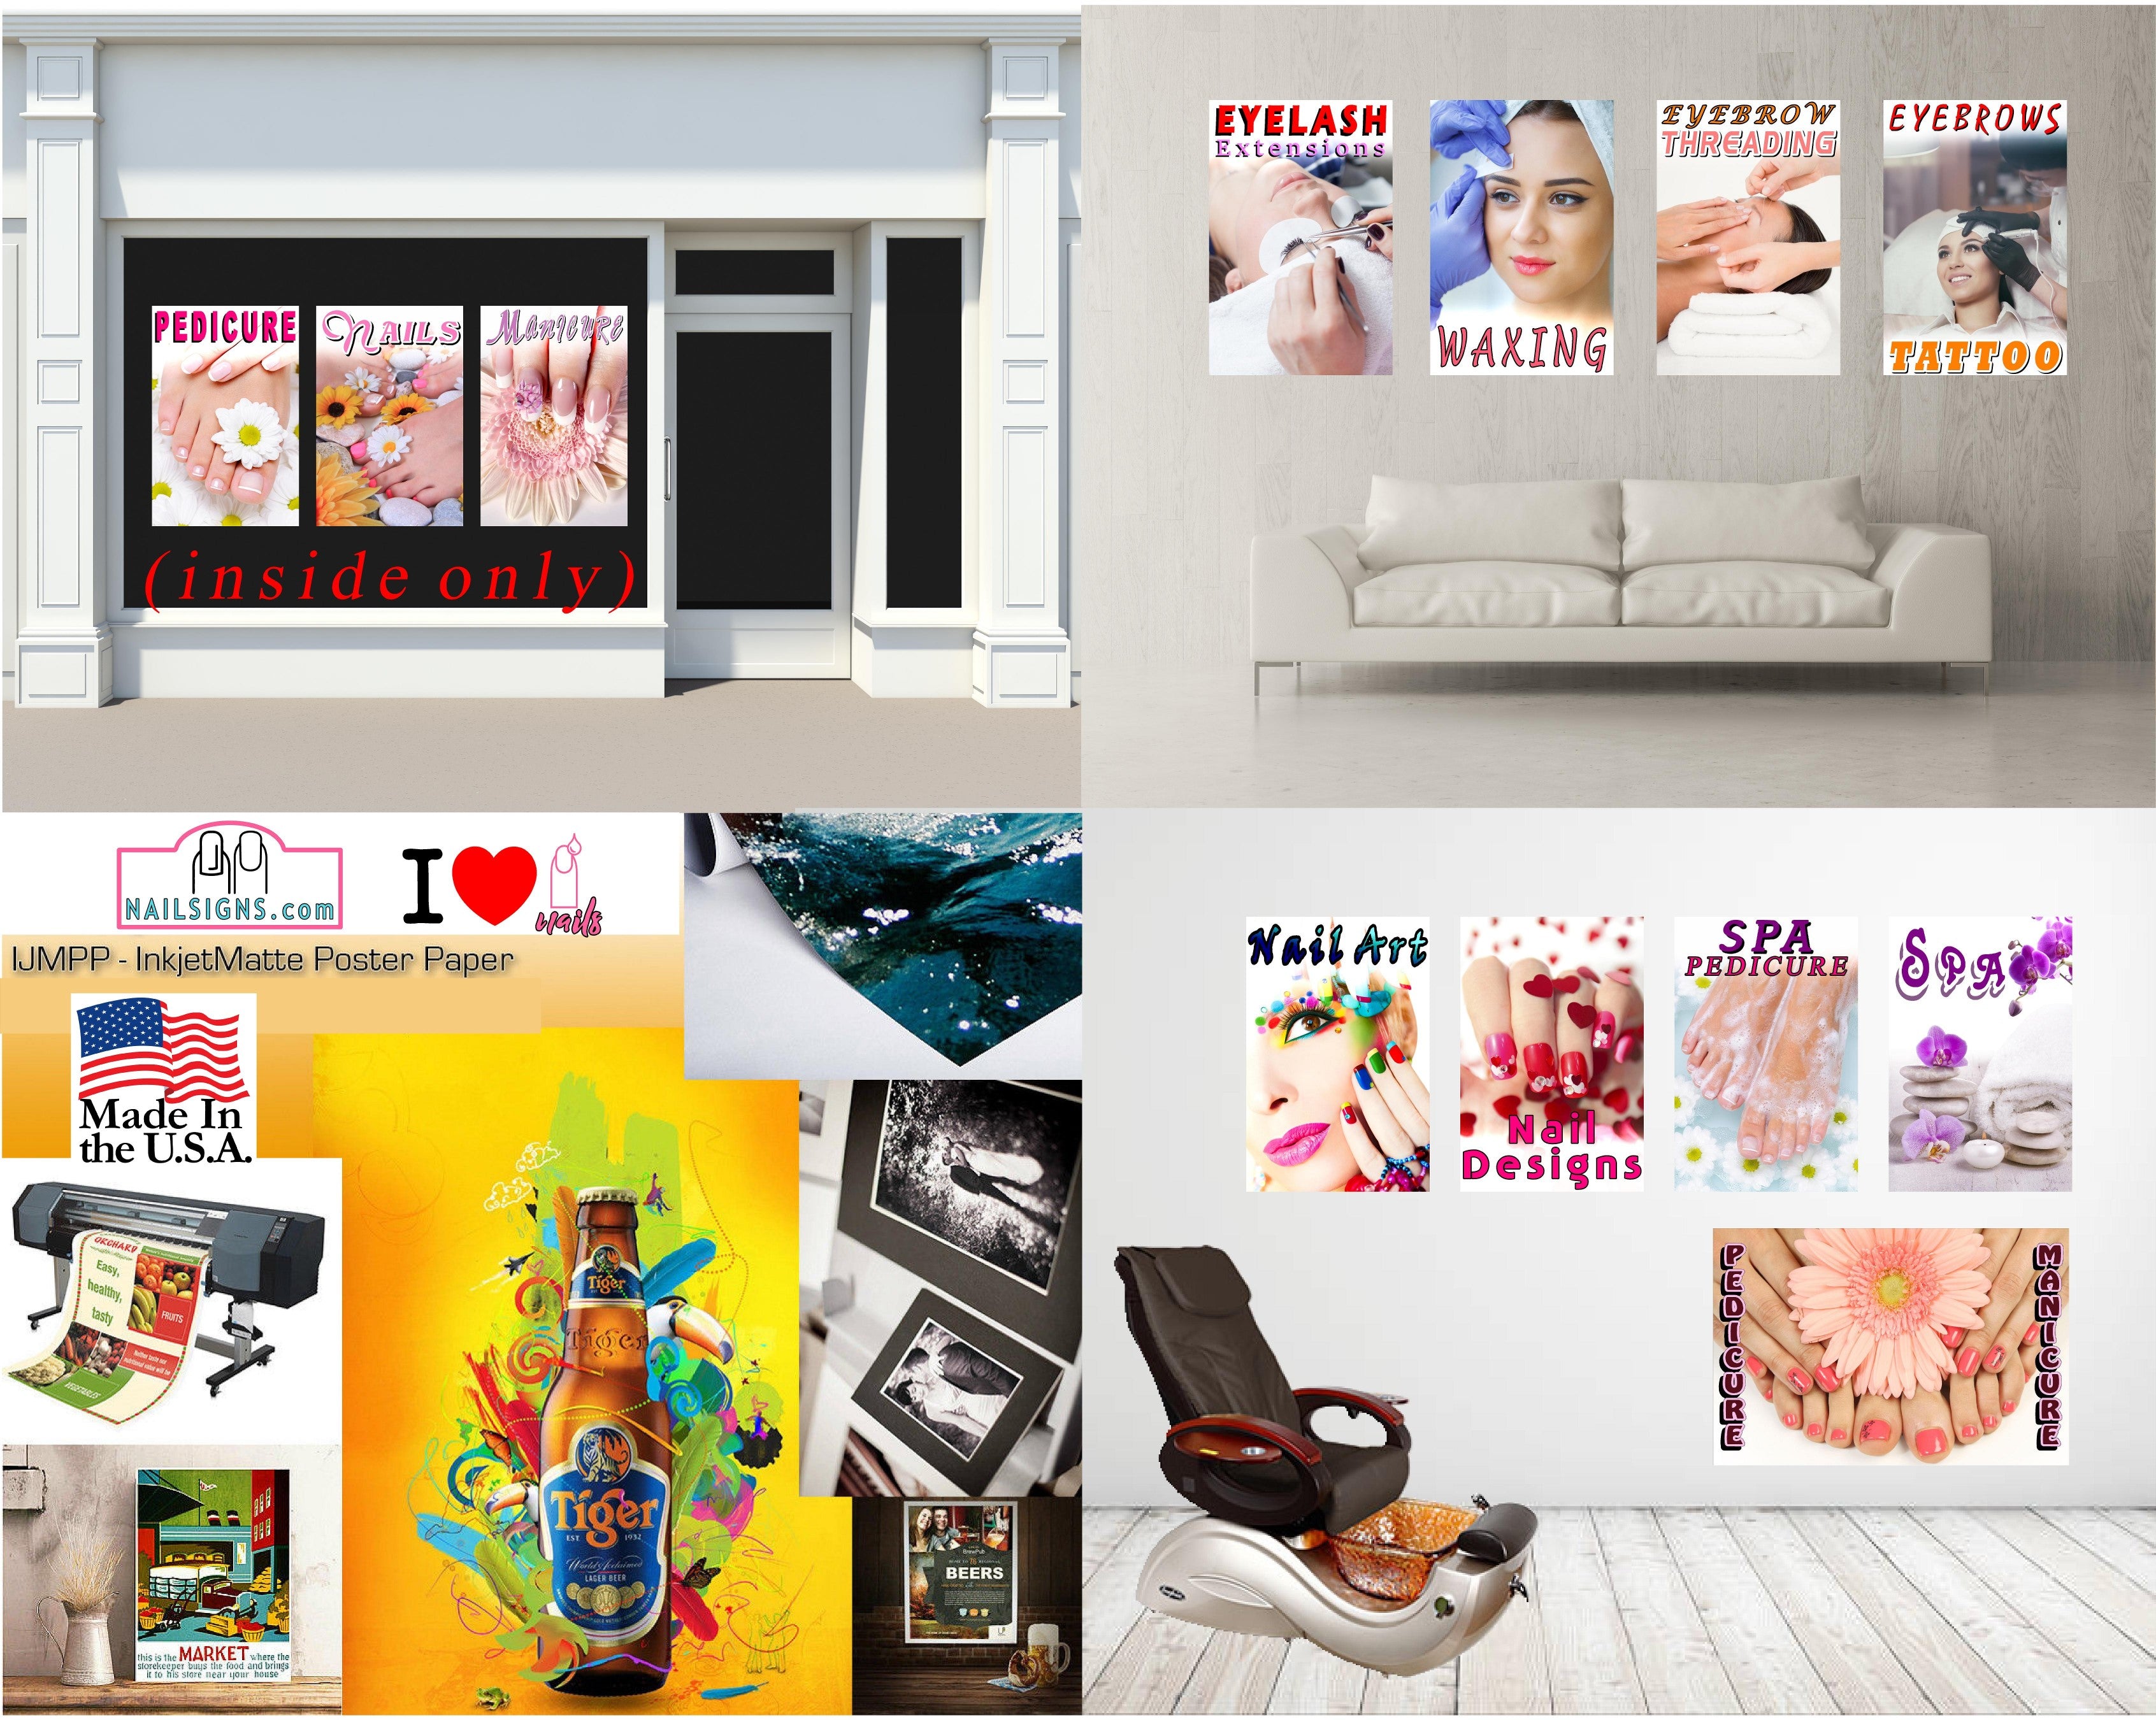 Skin Care 01 Photo-Realistic Paper Poster Premium Interior Inside Sign Advertising Wall Window Non-Laminated Vertical